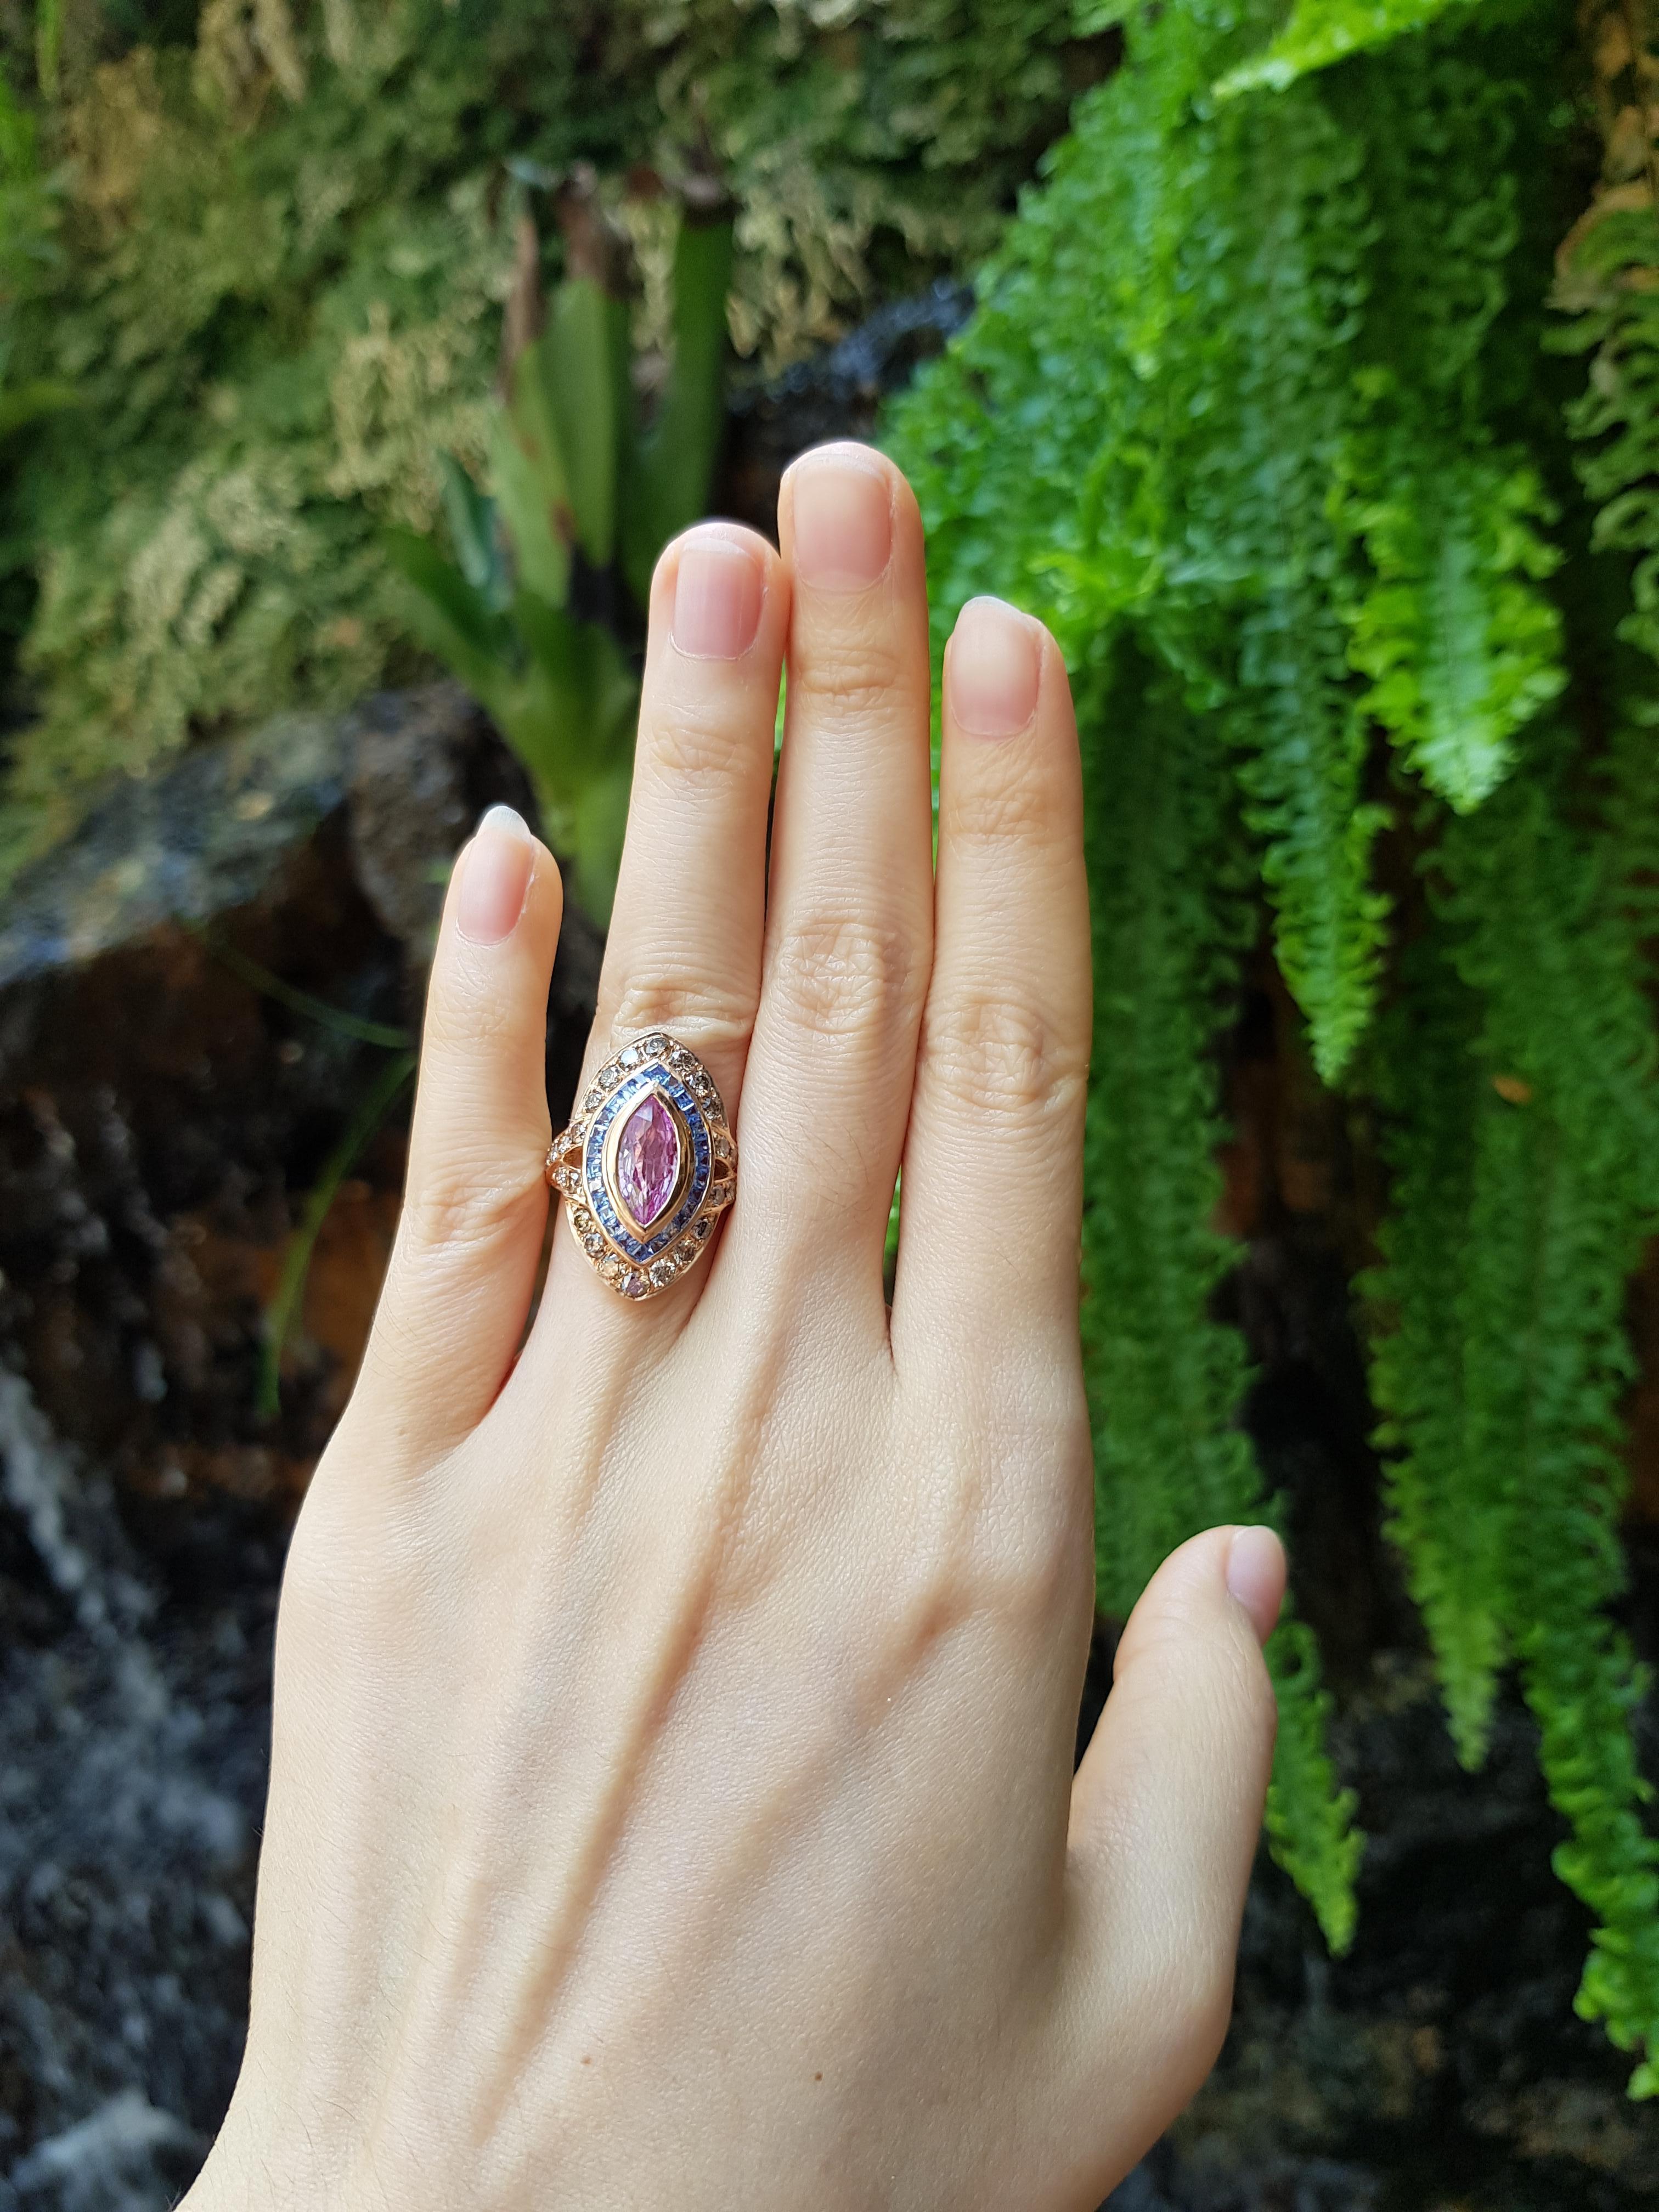 Pink Sapphire 1.61 carats with Blue Sapphire 1.63 carats and Brown Diamond 1.28 carats Ring set in 18 Karat Rose Gold Settings

Width: 1.6 cm
Length: 2.6 cm 
Ring Size: 50

